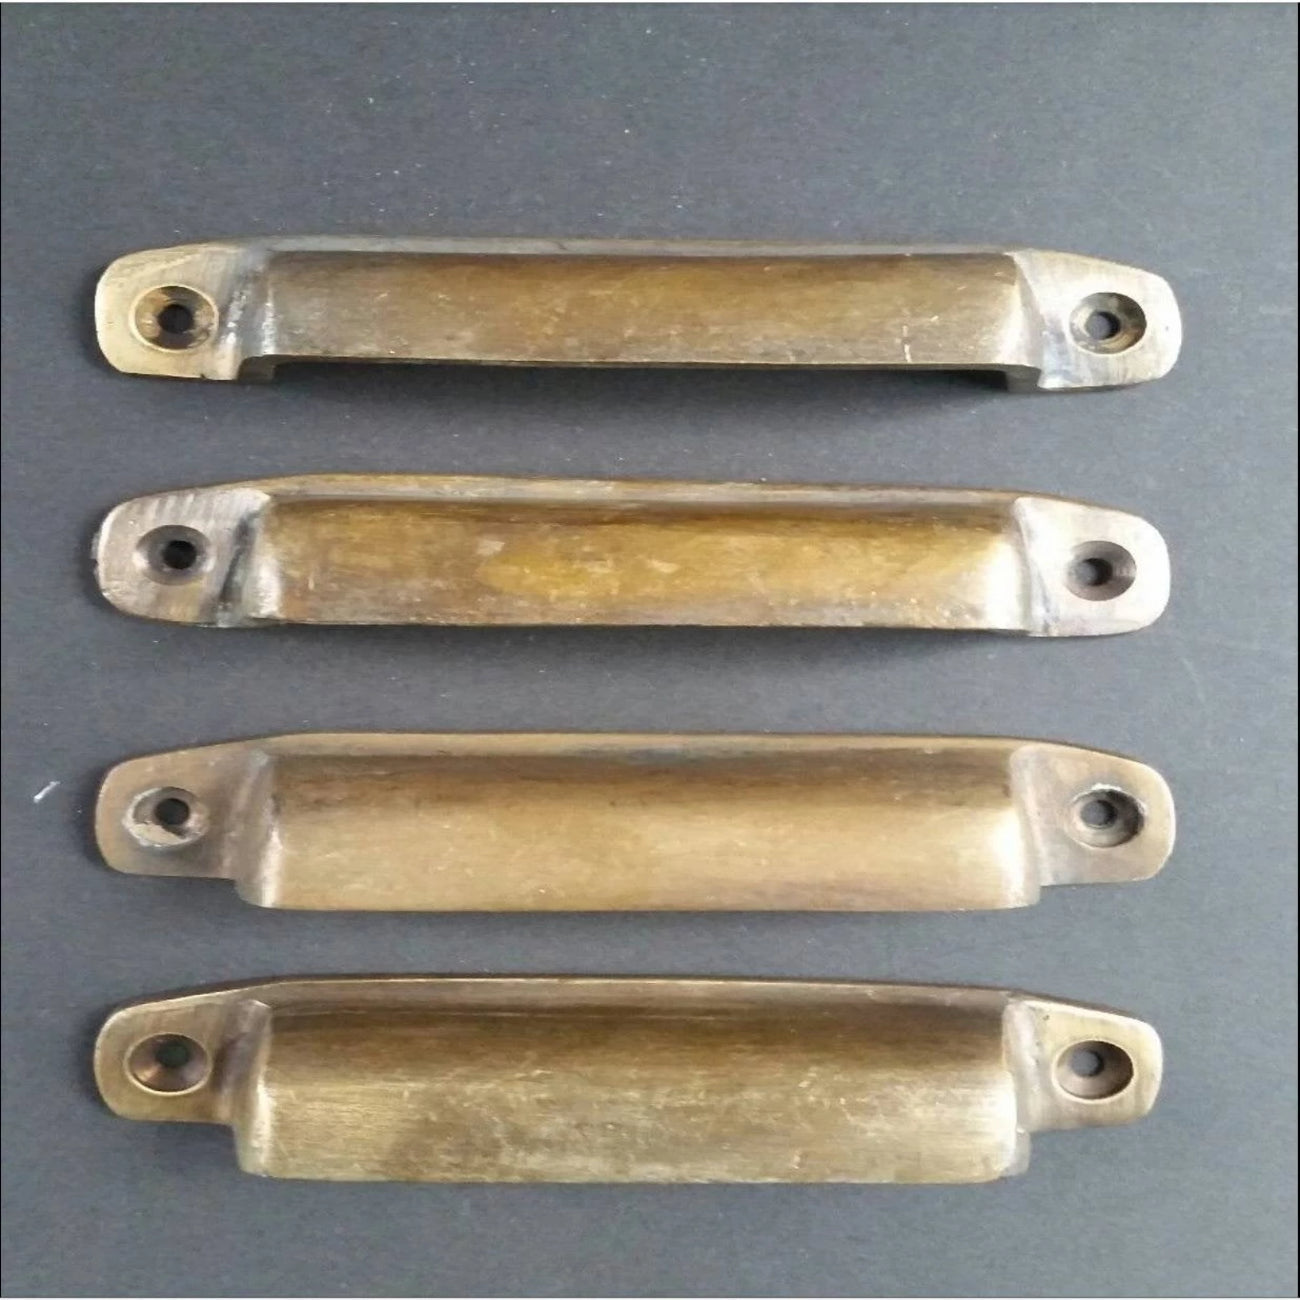 4 Antique Brass Apothecary Cup Drawer Cabinet Bin Pulls Handles 4" wide #A16